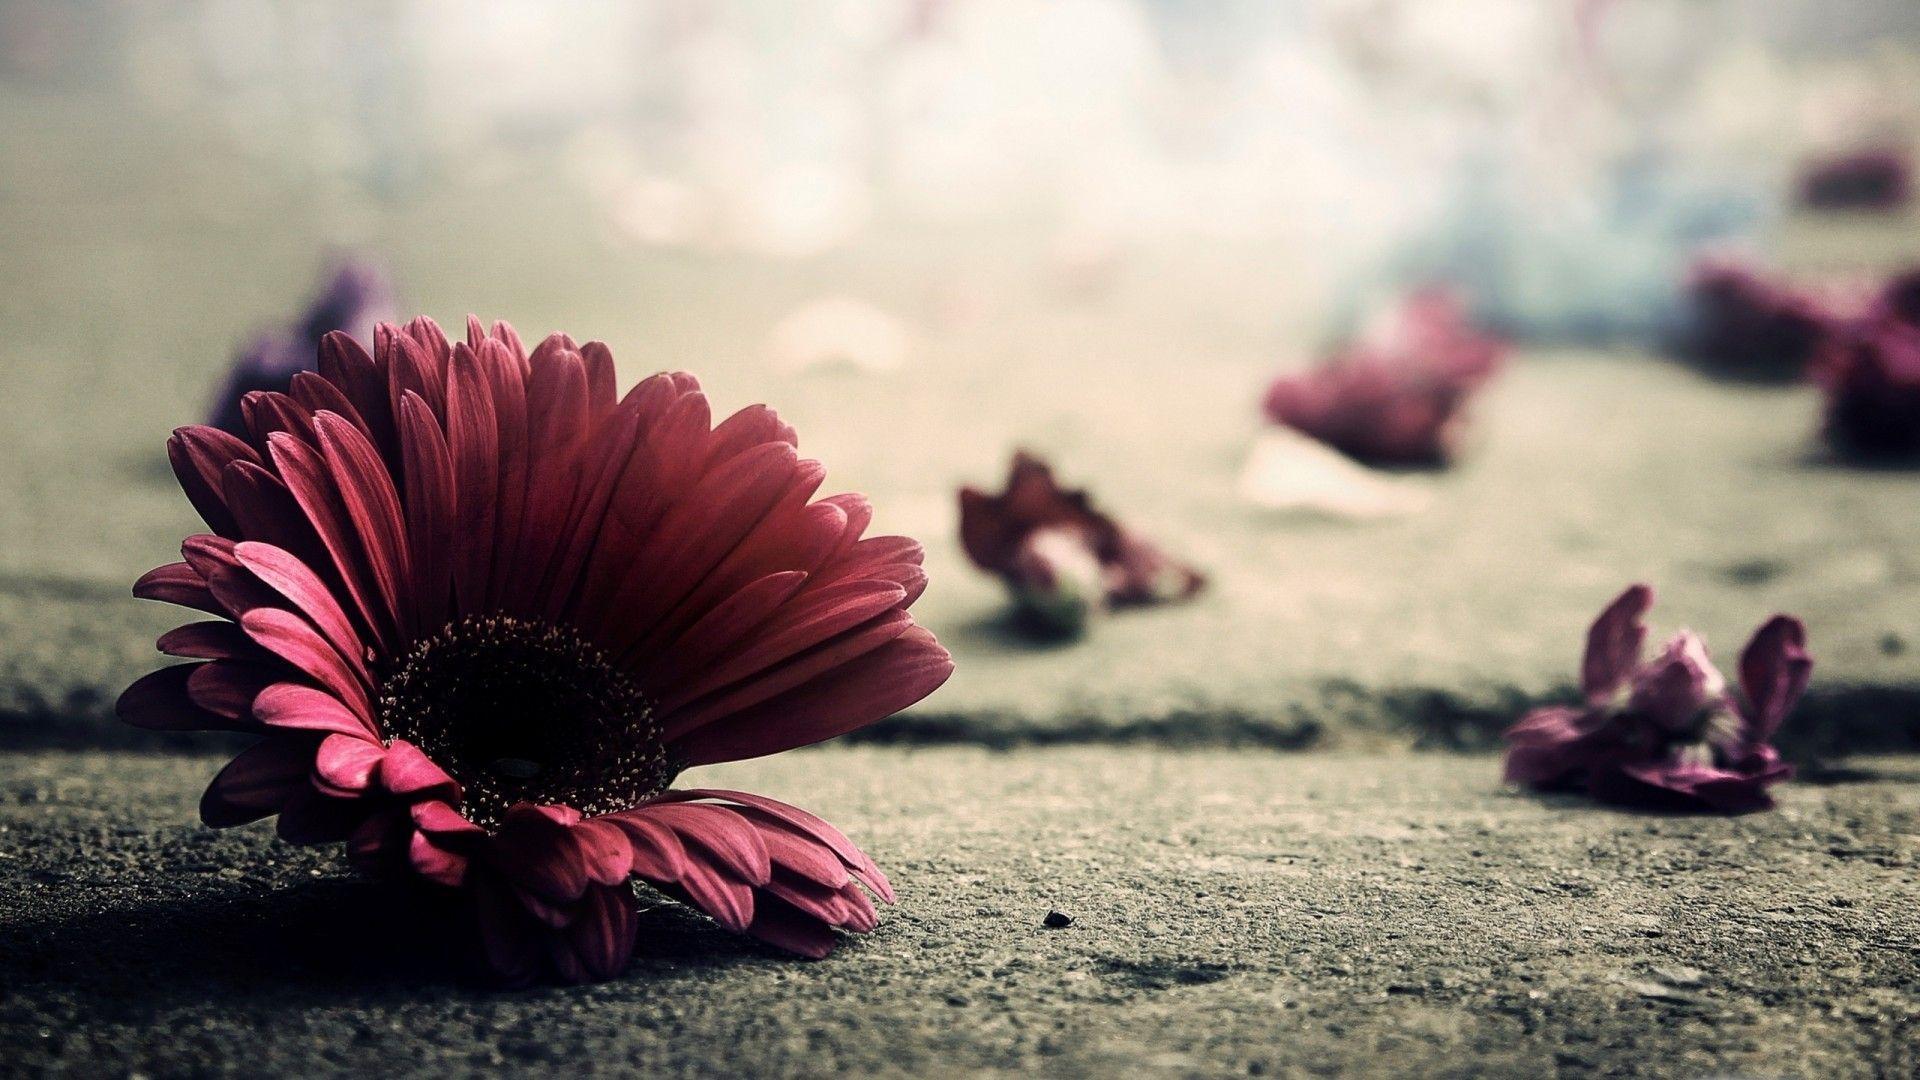 A single flower laying on the ground - Vintage fall